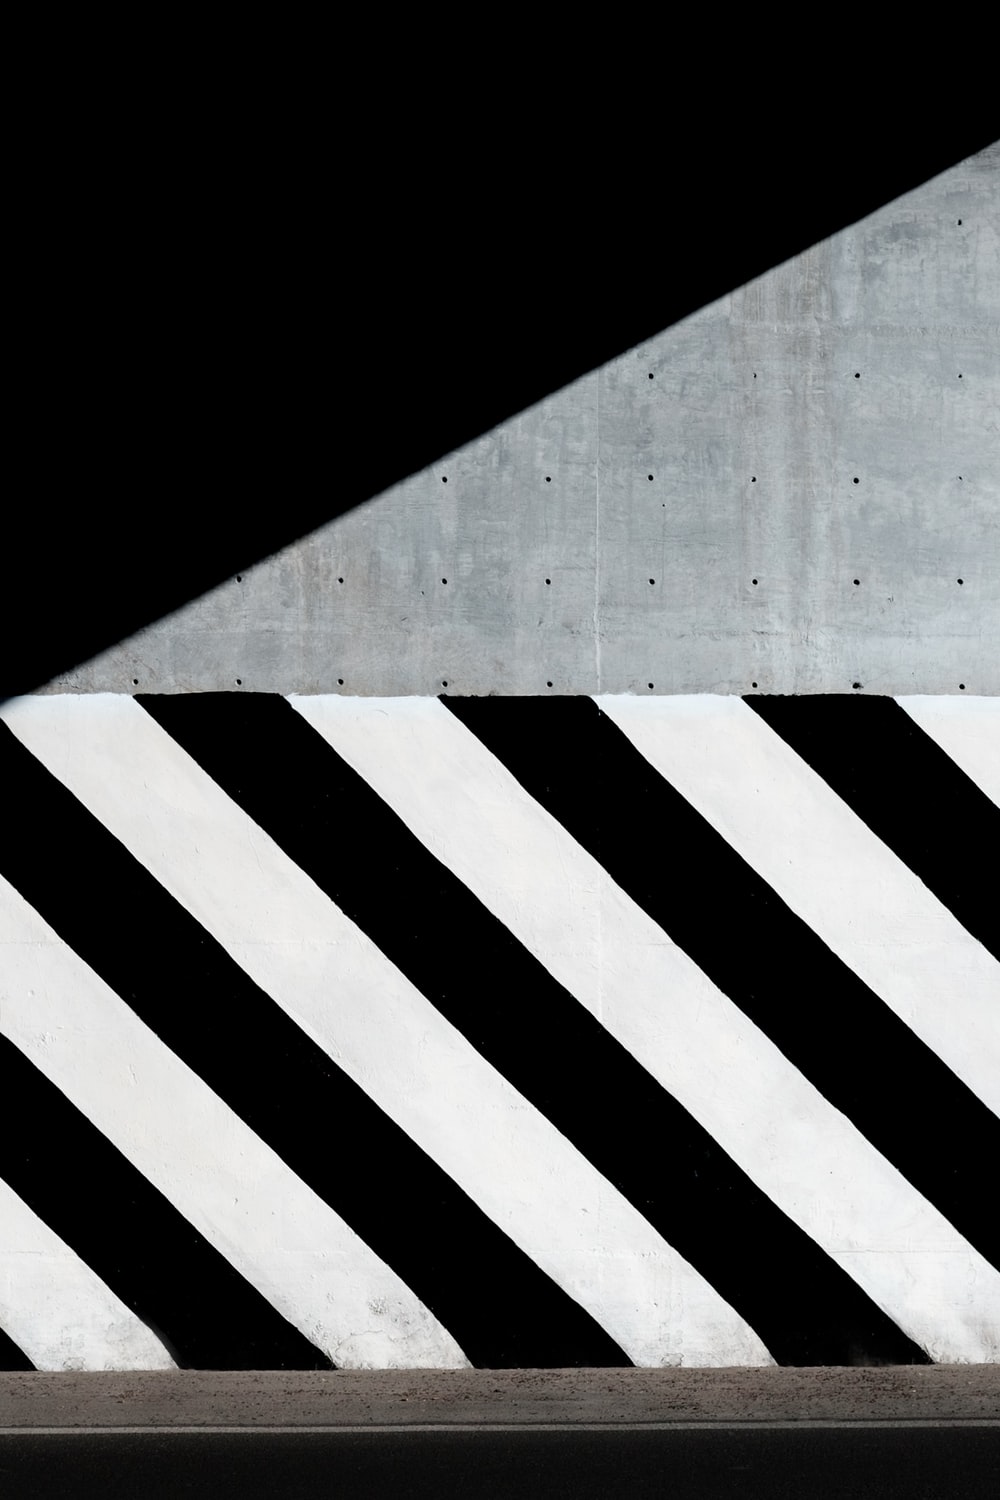 Black And White Diagonal Lines Wallpapers